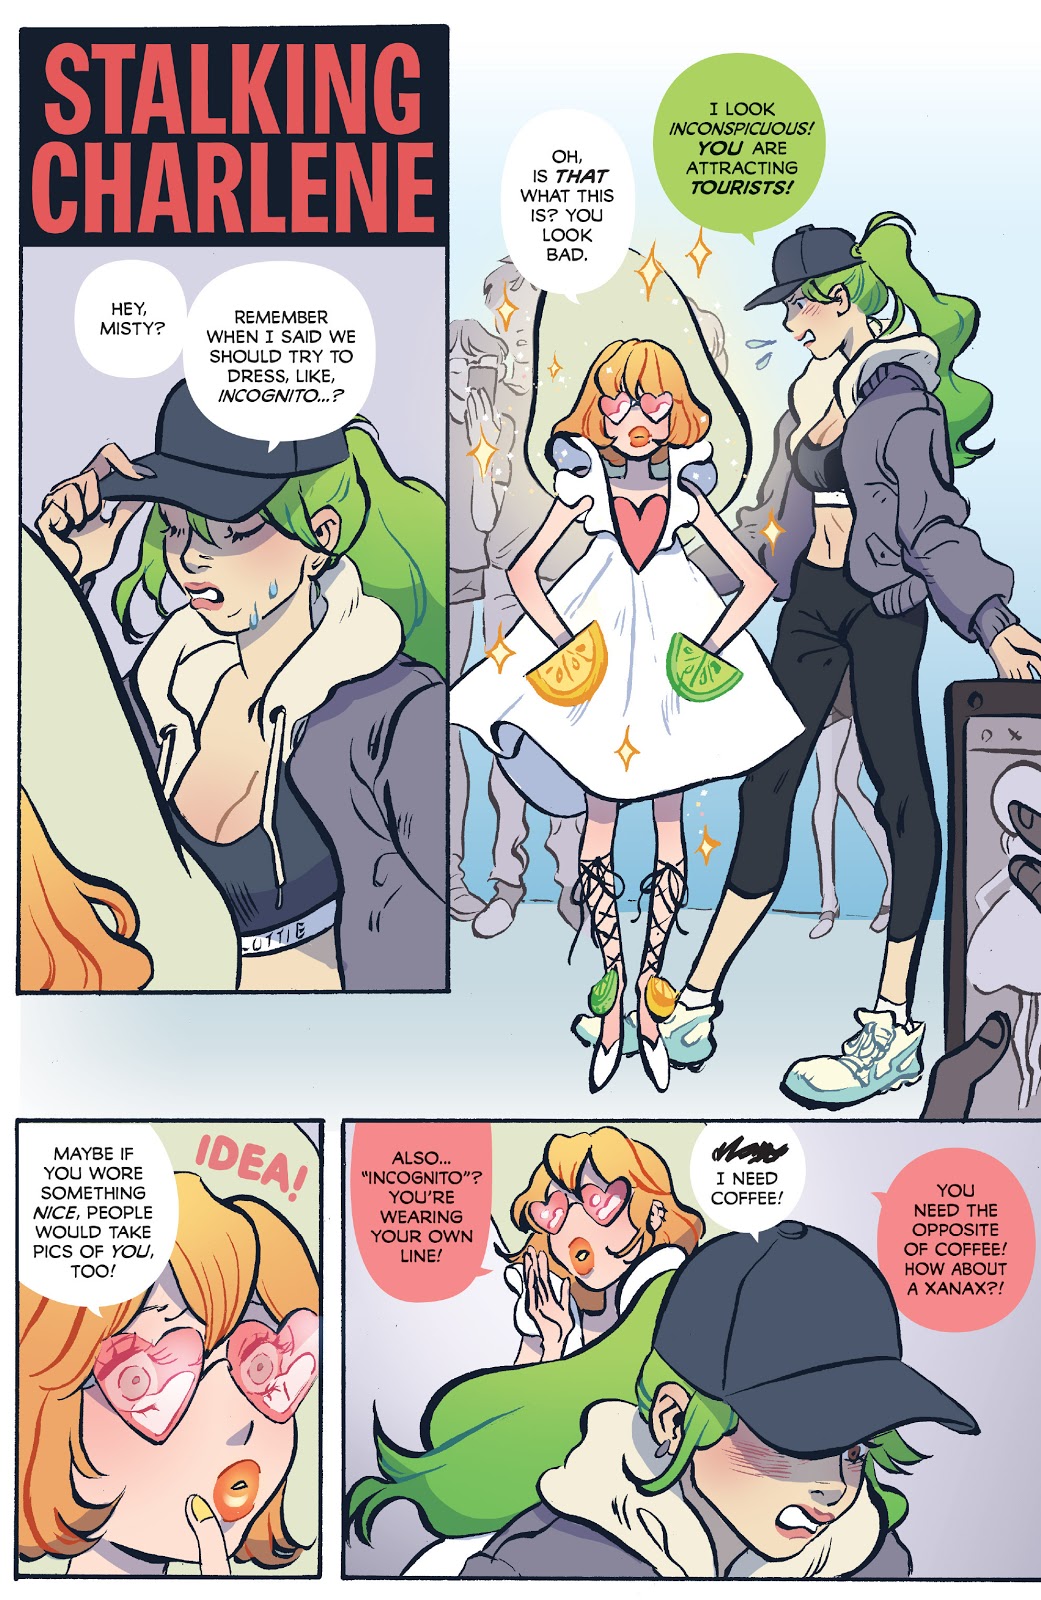 Snotgirl Green Hair, Don't Care review